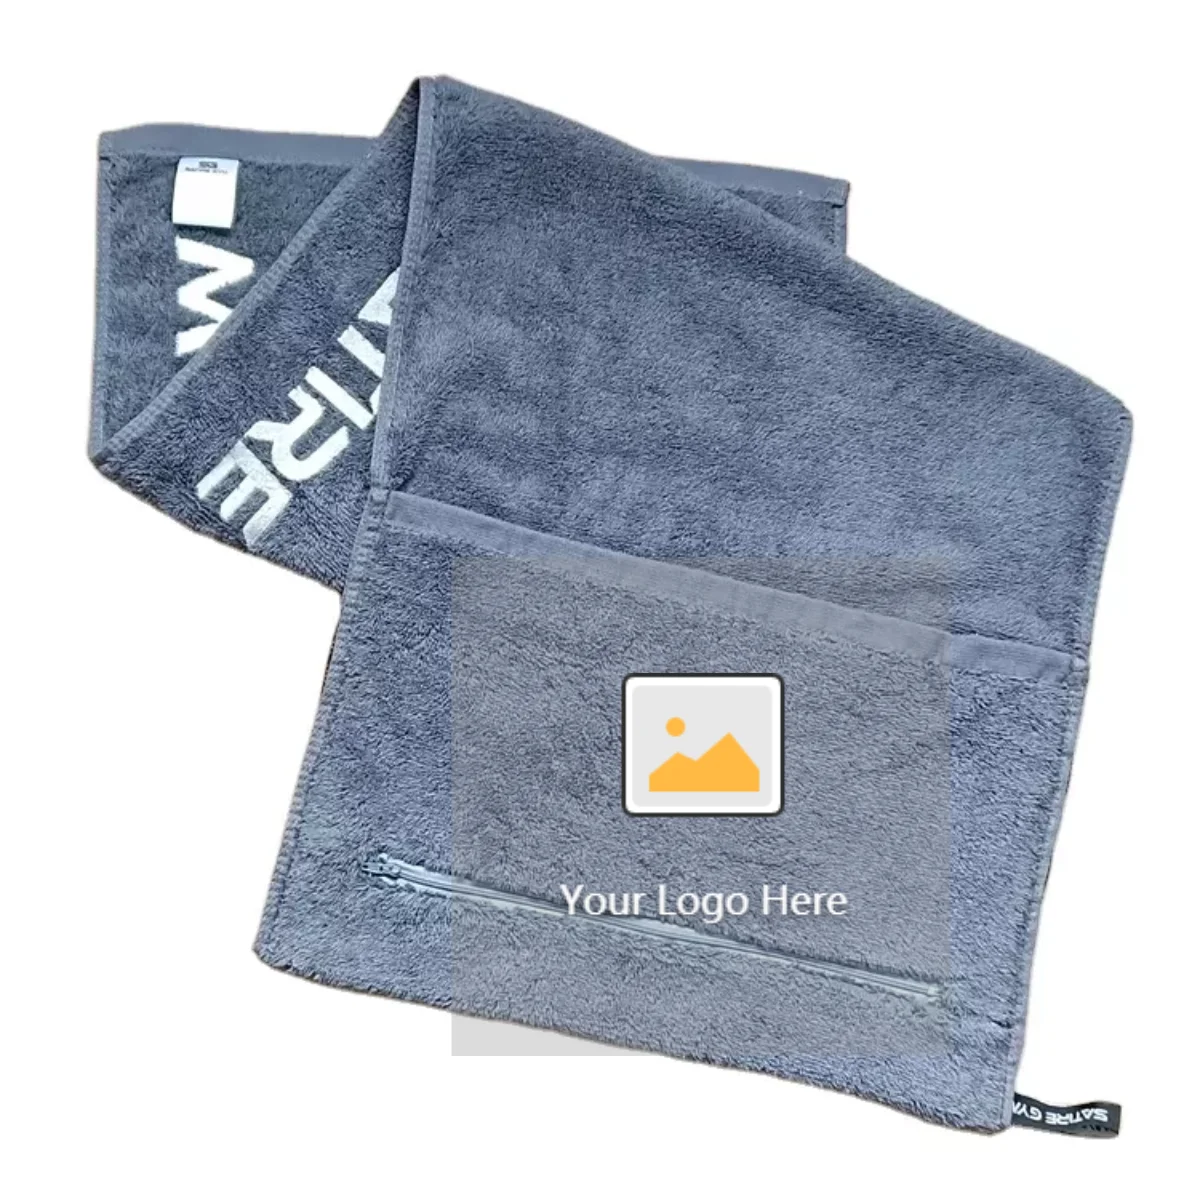 Sports Gym Fitness Towel With Zipper Pocket Bench Magnetic Custom Logo  Cotton/microfiber Sweat Towel - Buy Sweat Towel Fitness Towel,Gym Towel  With Zipper Pocket,Custom Embroidery Exercise Sport Towel Product on  Alibaba.com